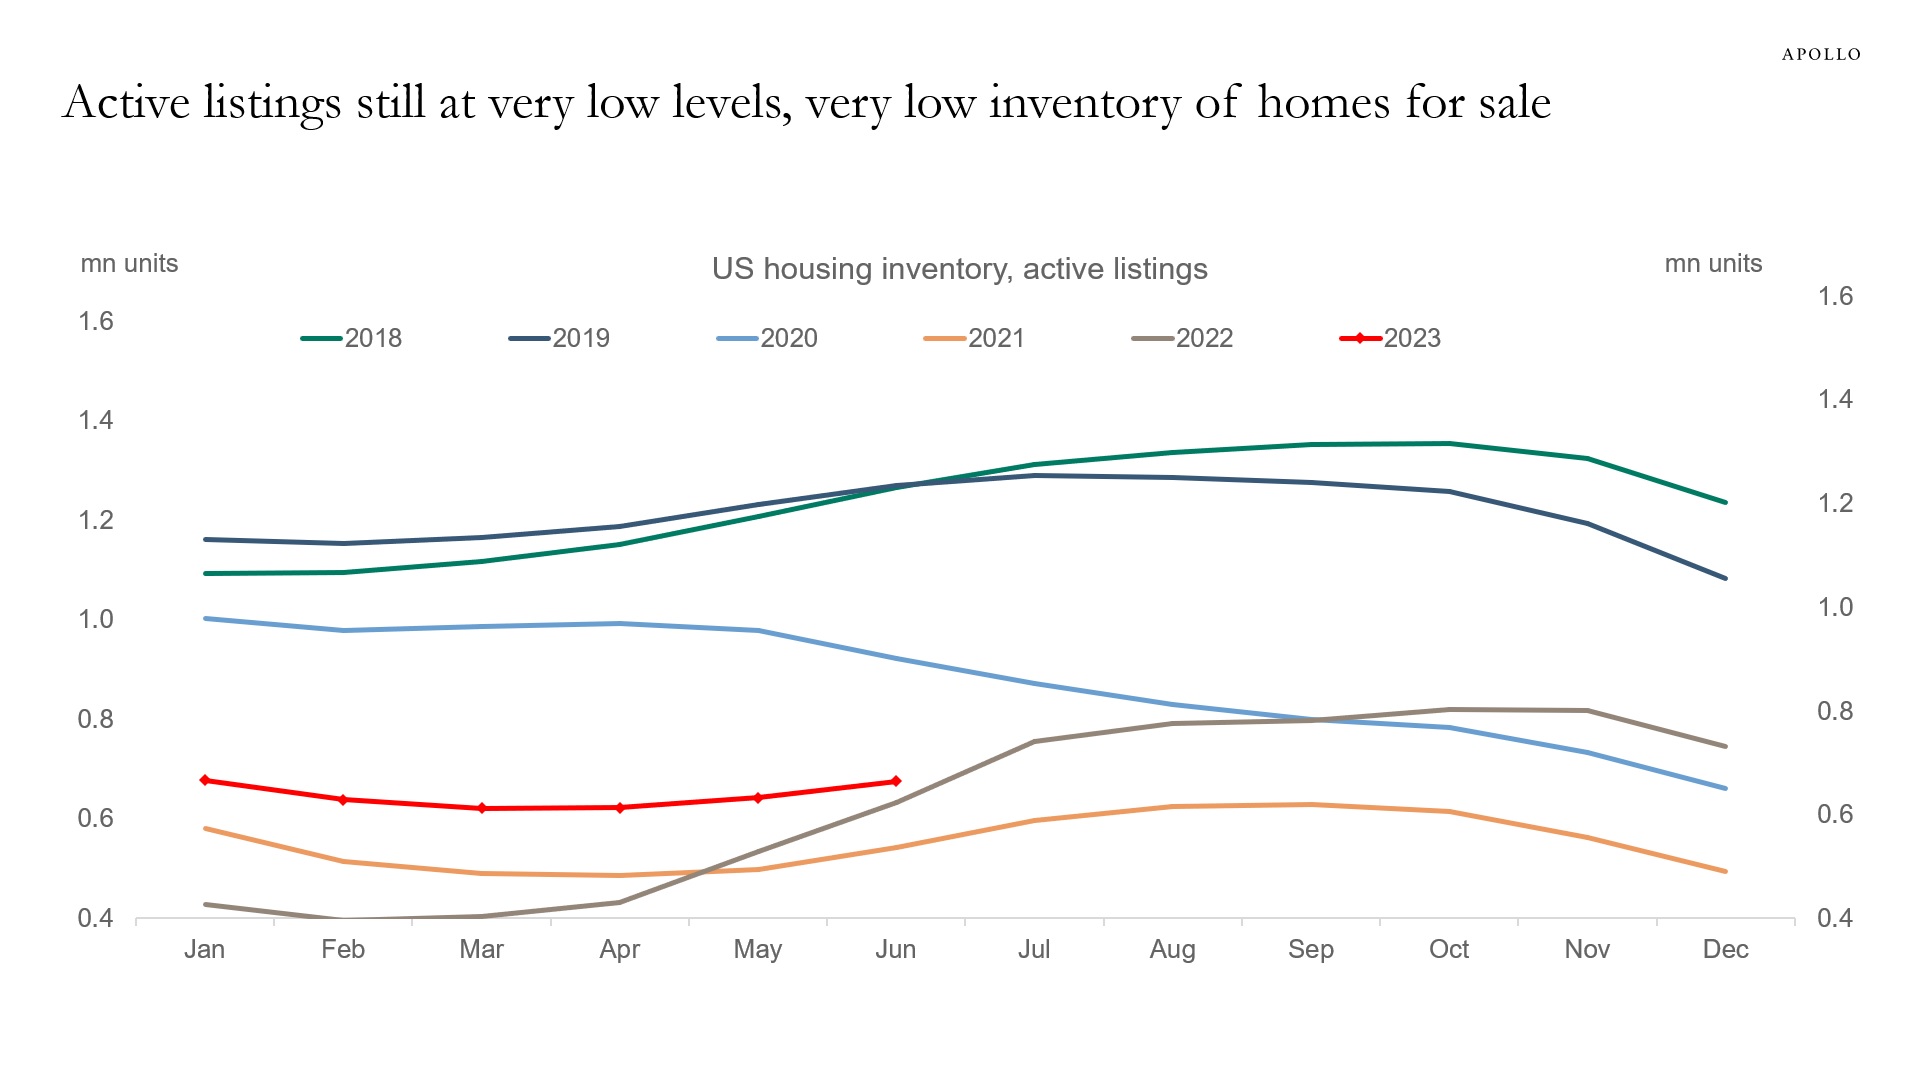 US housing listings and inventory are low